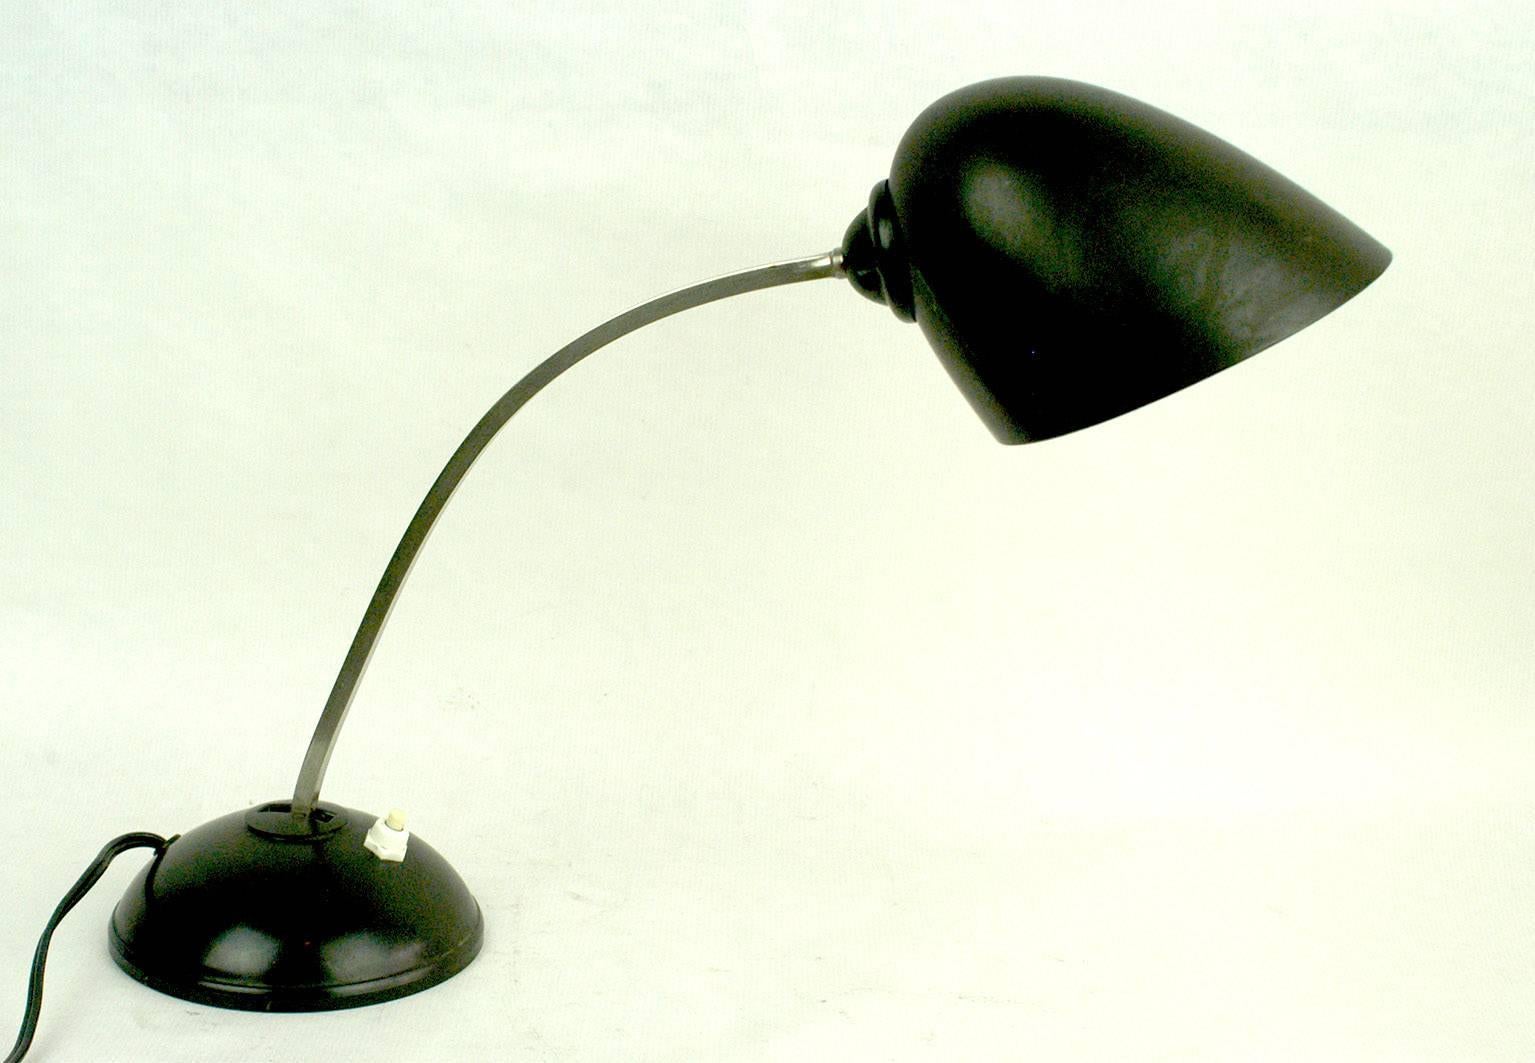 Charming Bauhaus or Industrial style black desk lamp from the 1930s with adjustable shade and chrome stem, which can be adjusted as well. It’s shape is very close to E.K. Coles desk lamps and it has a manufacturers mark on the underside. After years